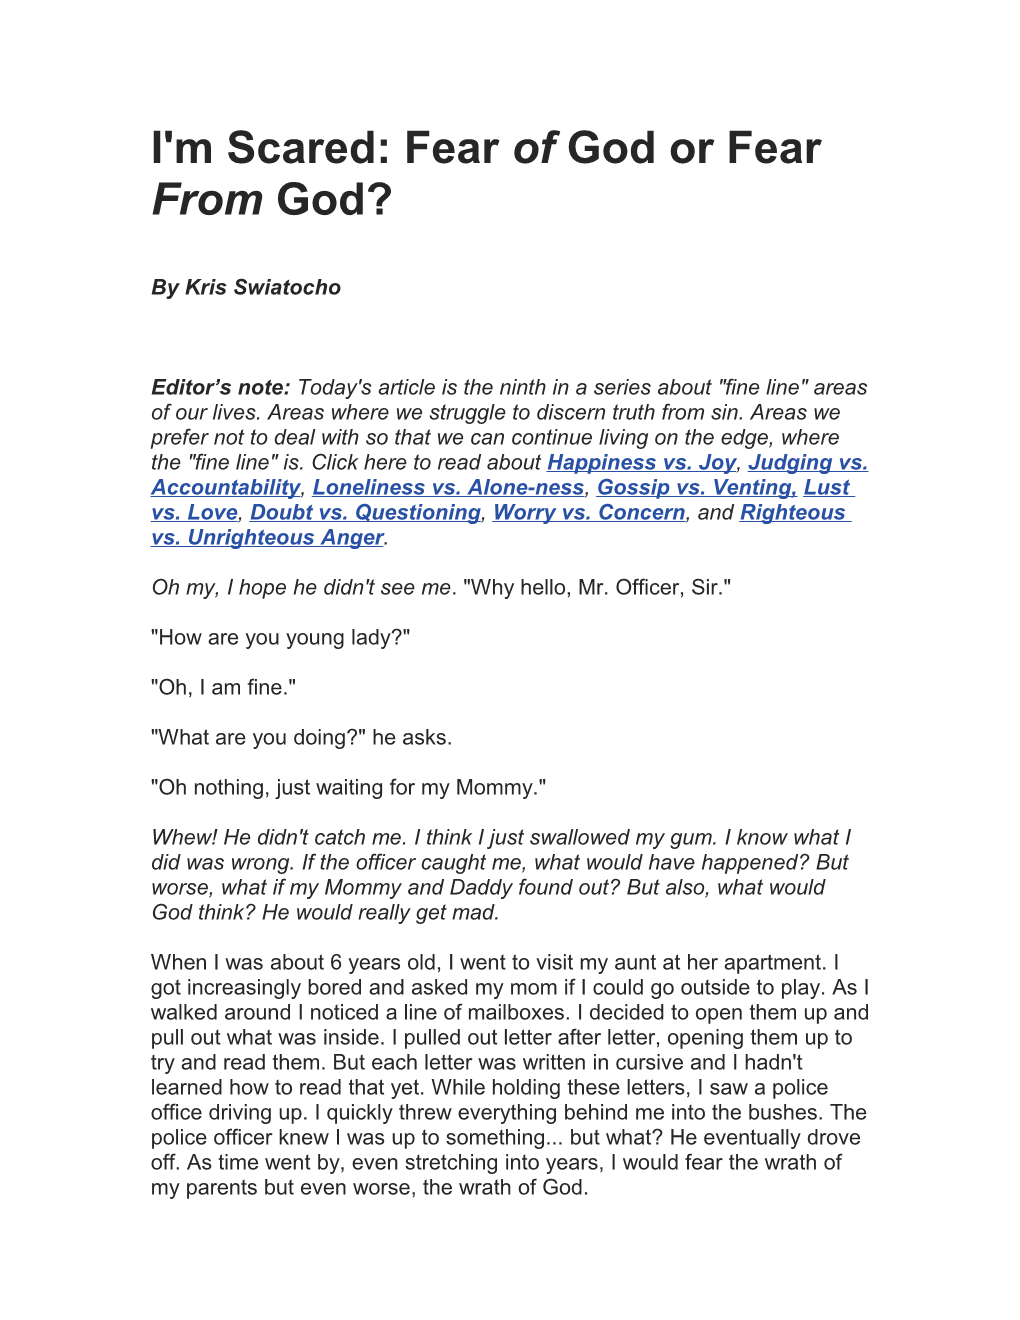 I'm Scared: Fear of God Or Fear from God?